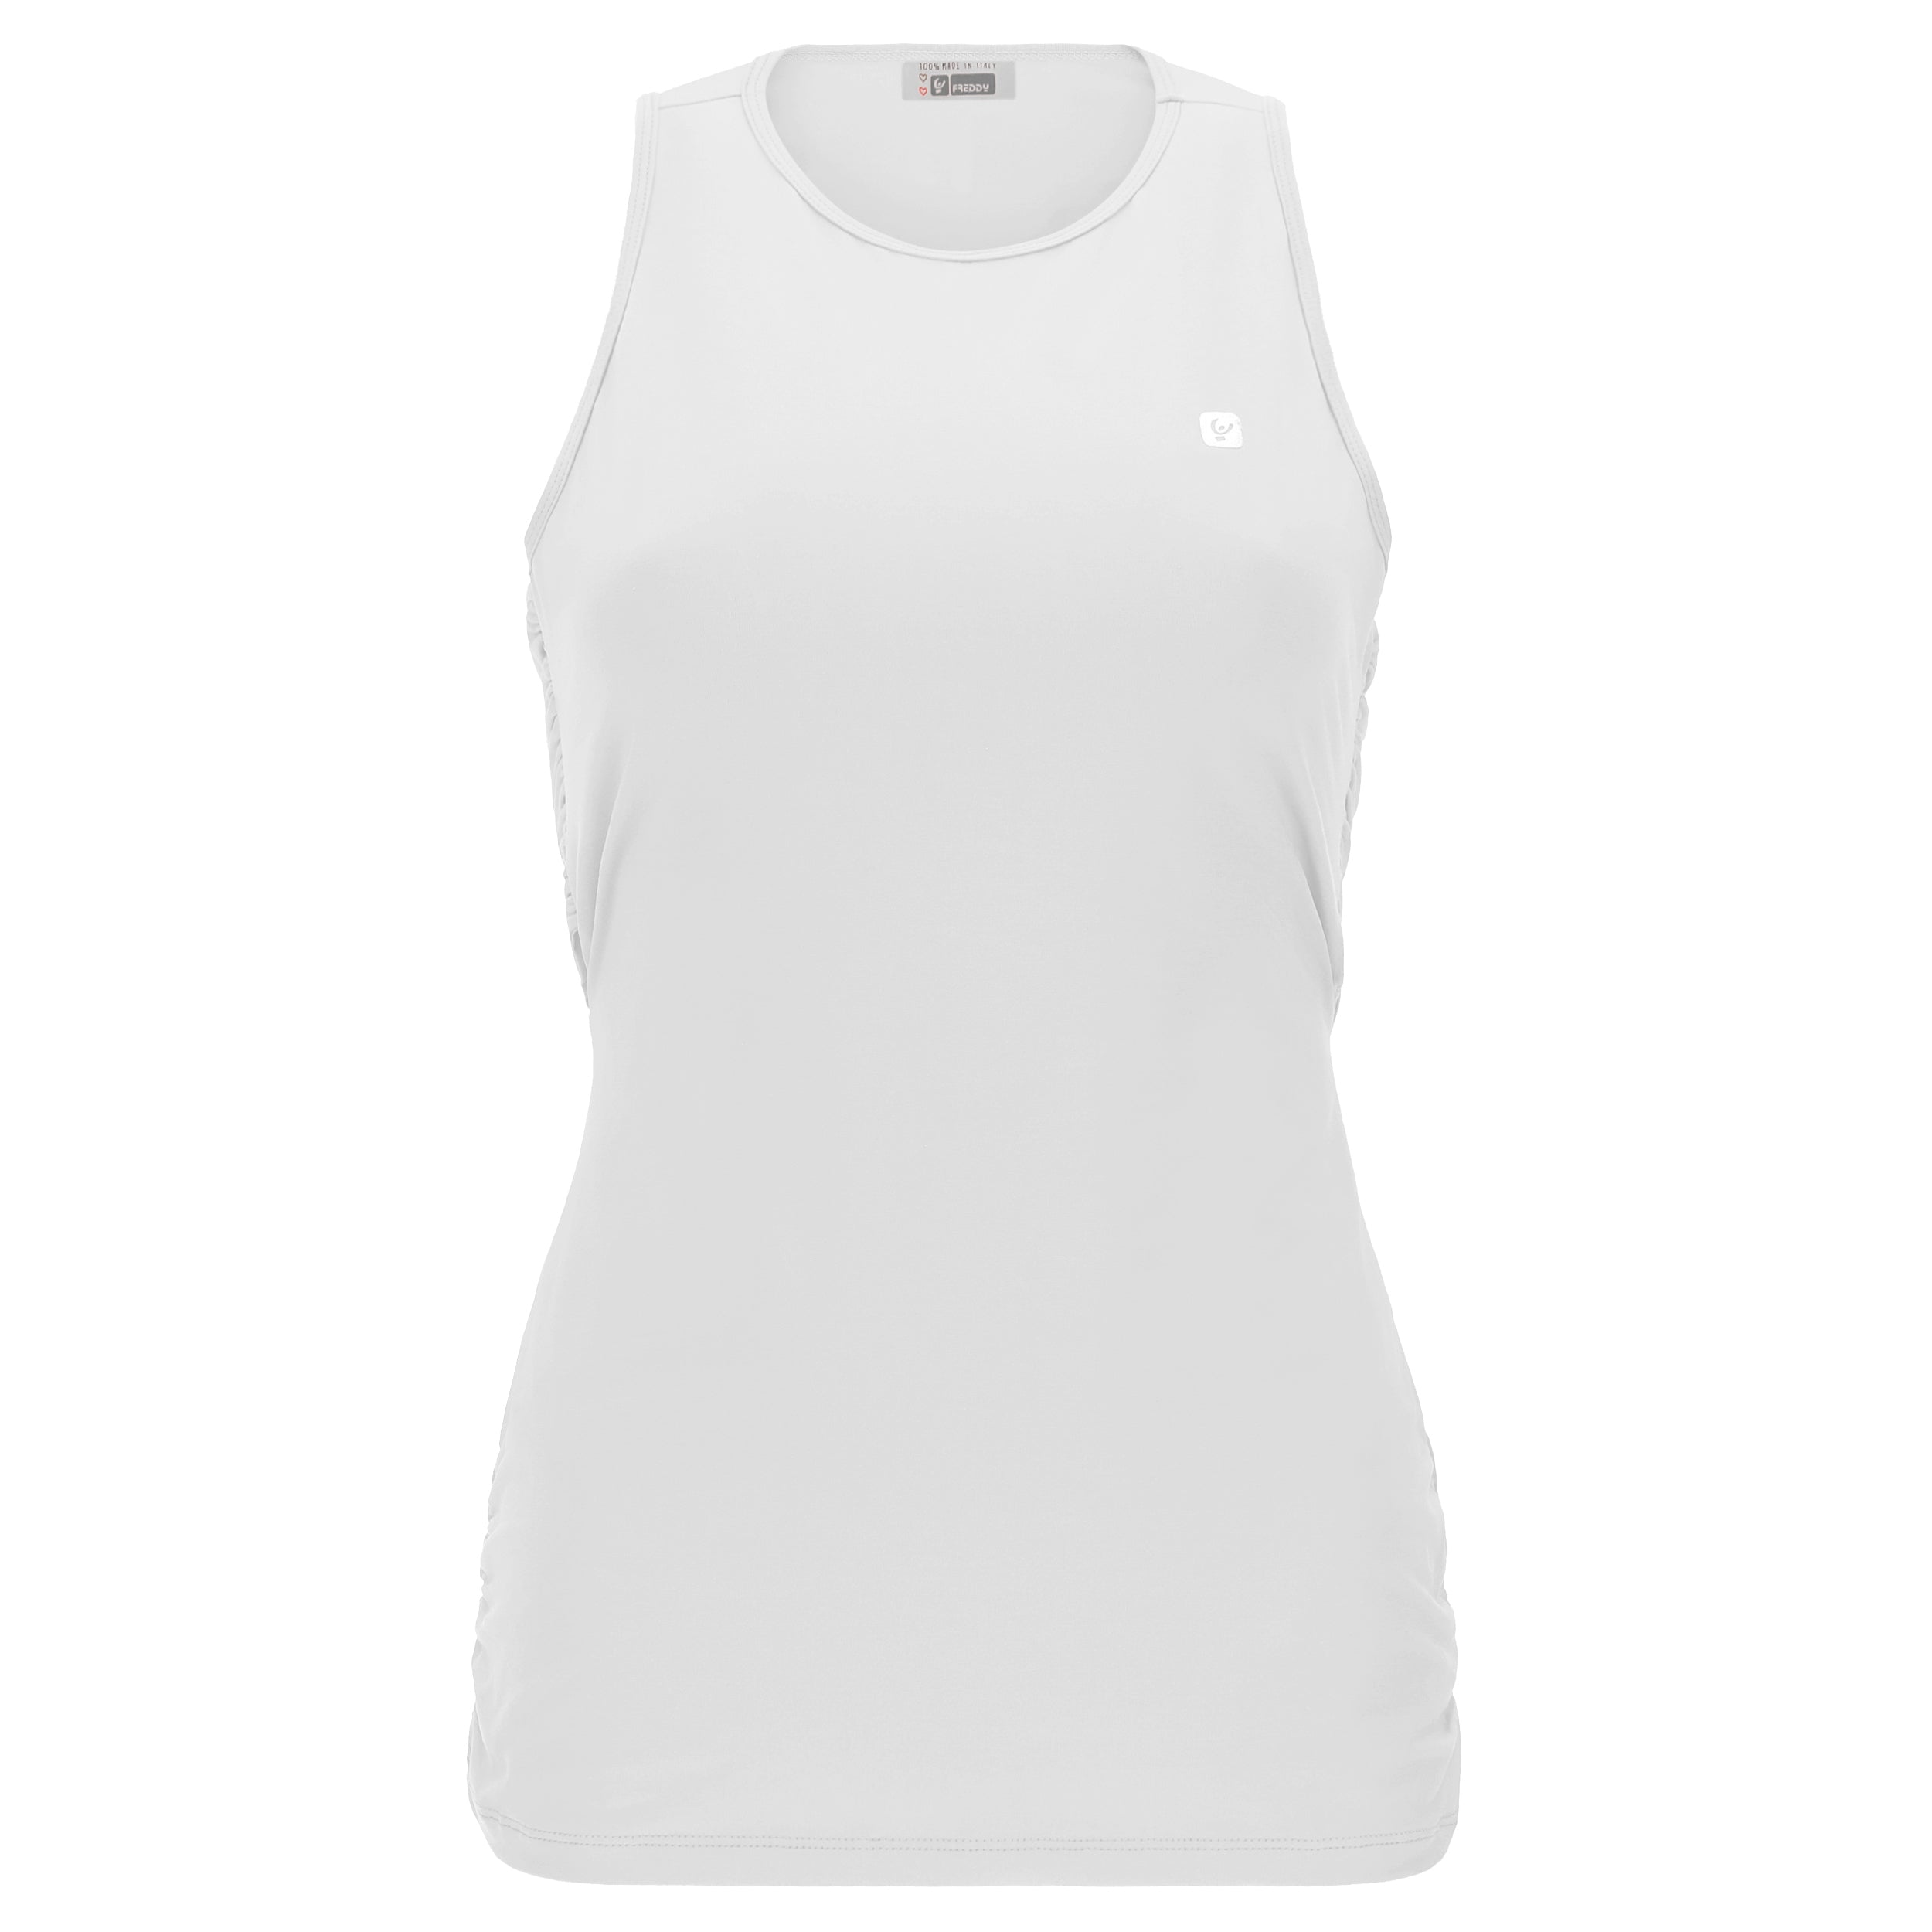 Yoga tank top with a criss cross back - White 3